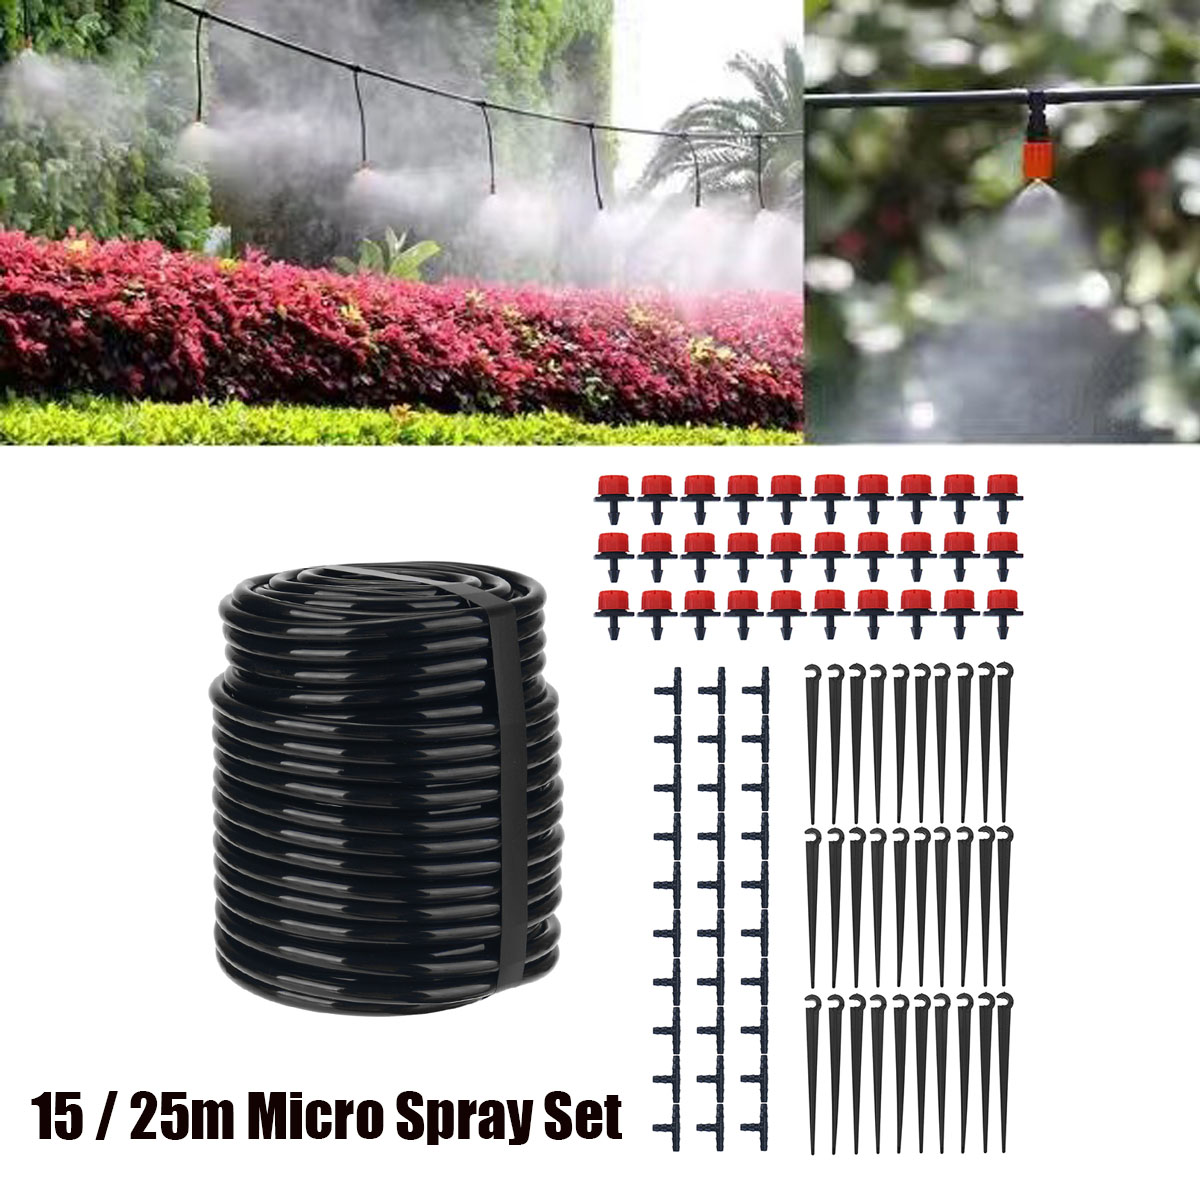 1525M-Adjustable-Water-Flow-Irrigation-Drippers-Nozzle-Barb-Connector-Kits-Set-Garden-1723508-2